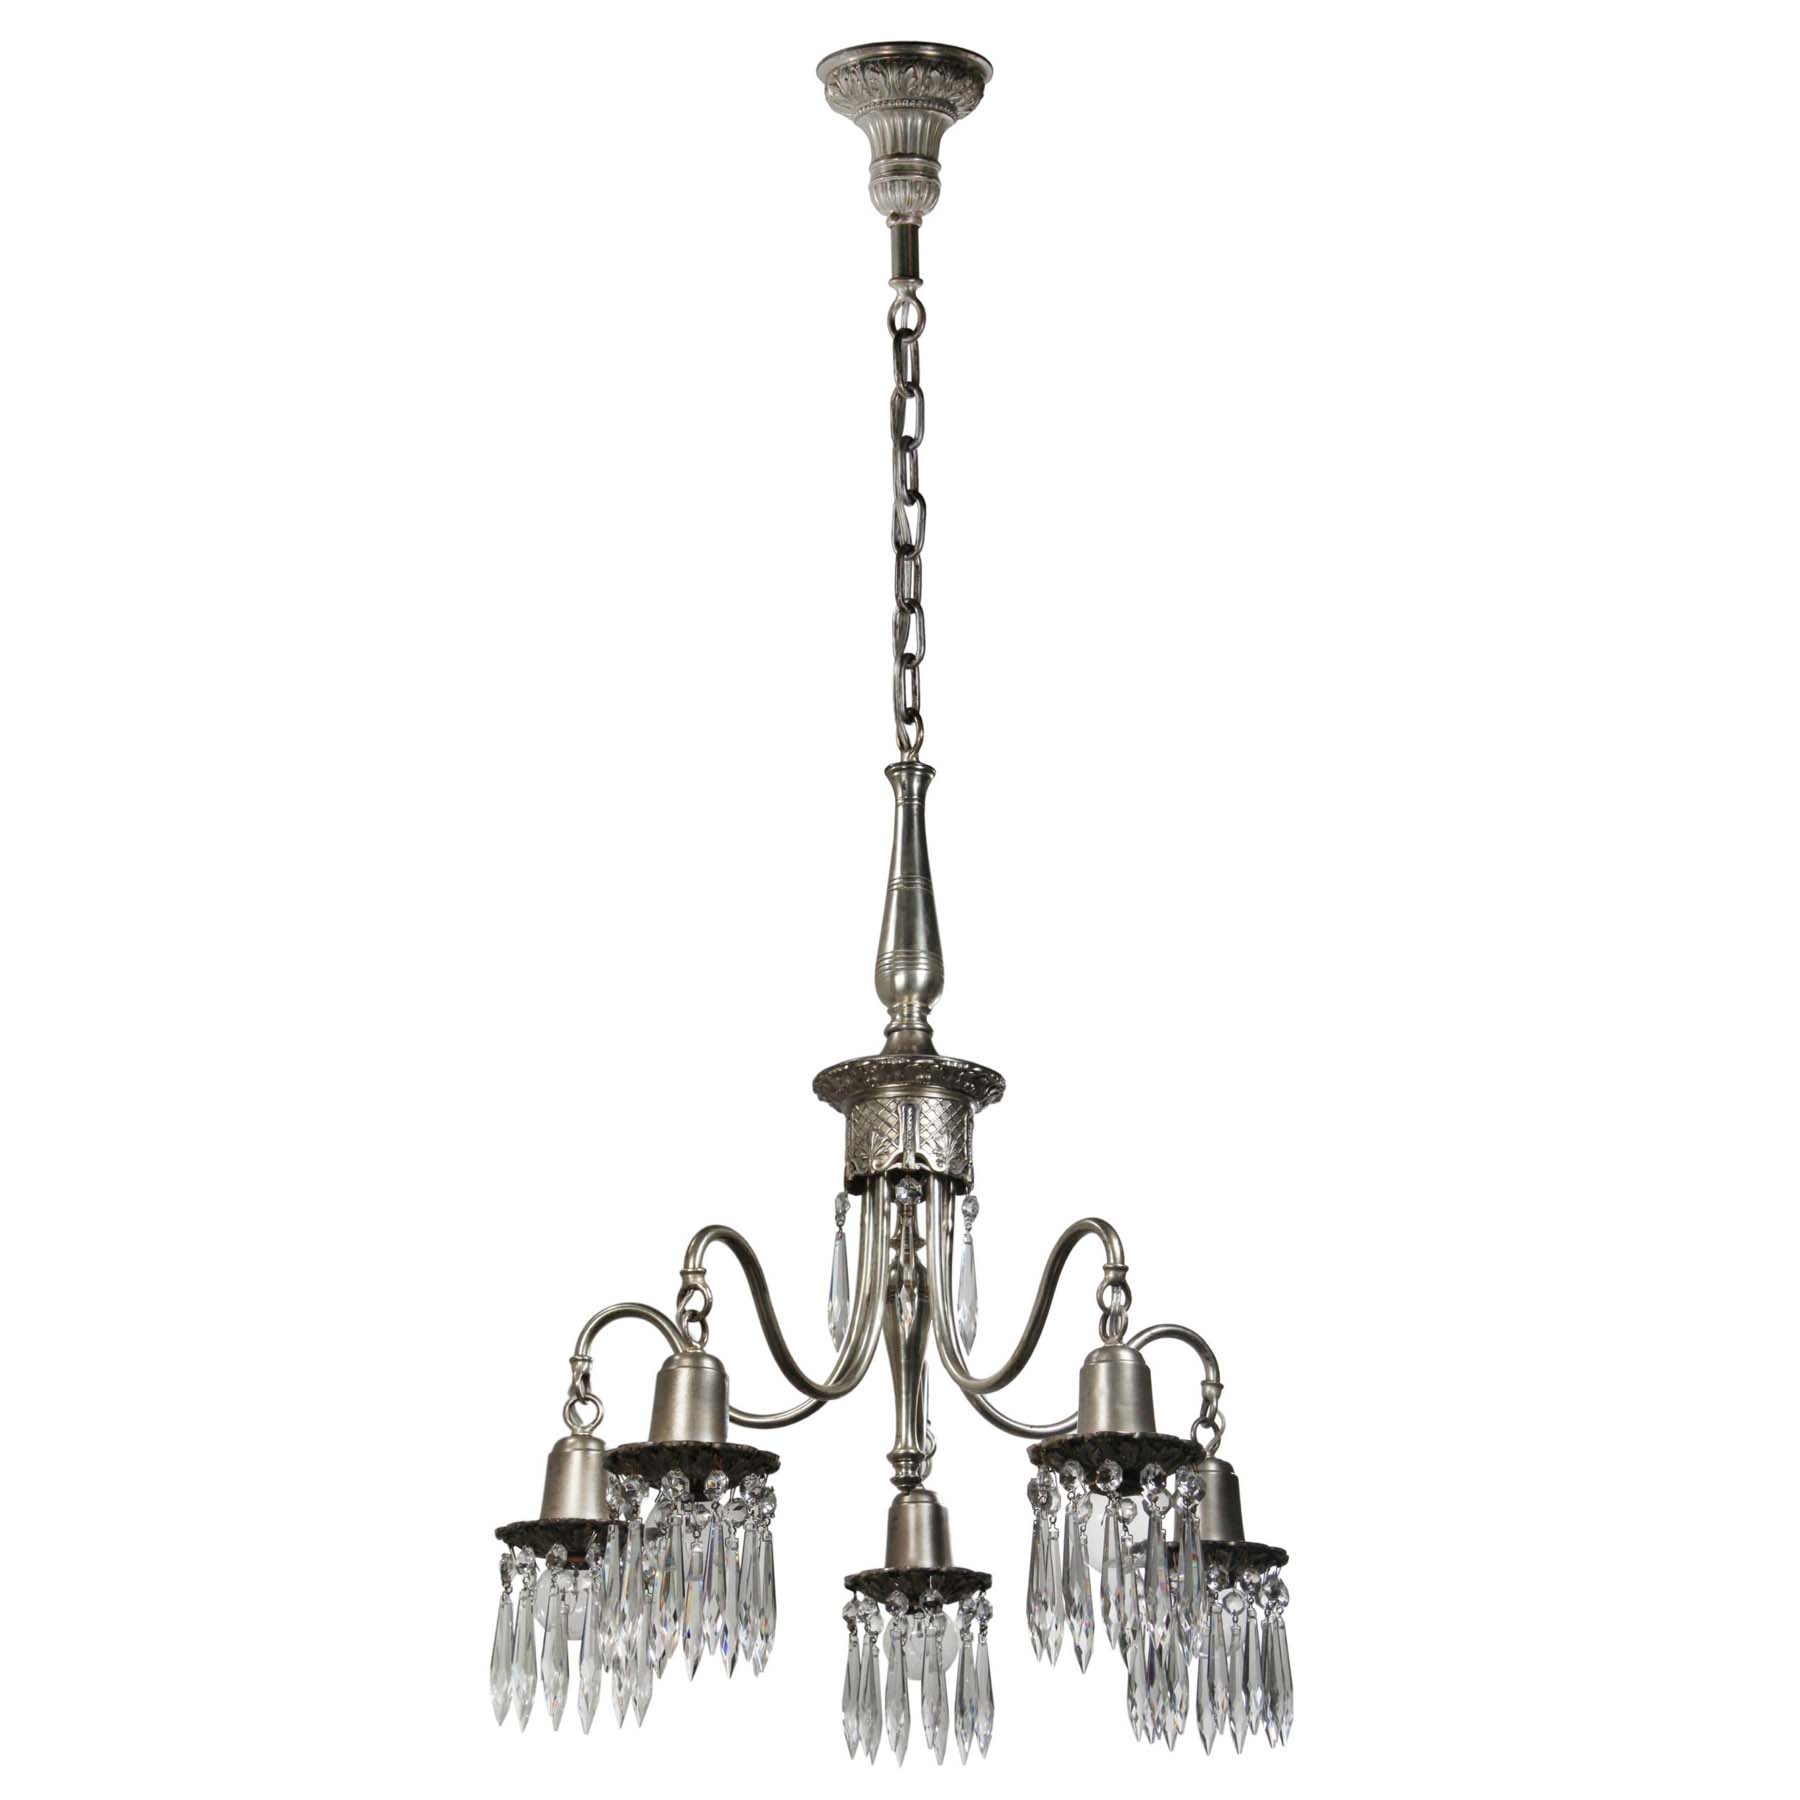 SOLD Antique Neoclassical Silver Plate Chandelier with Prisms, Star Chandelier Co. -69065